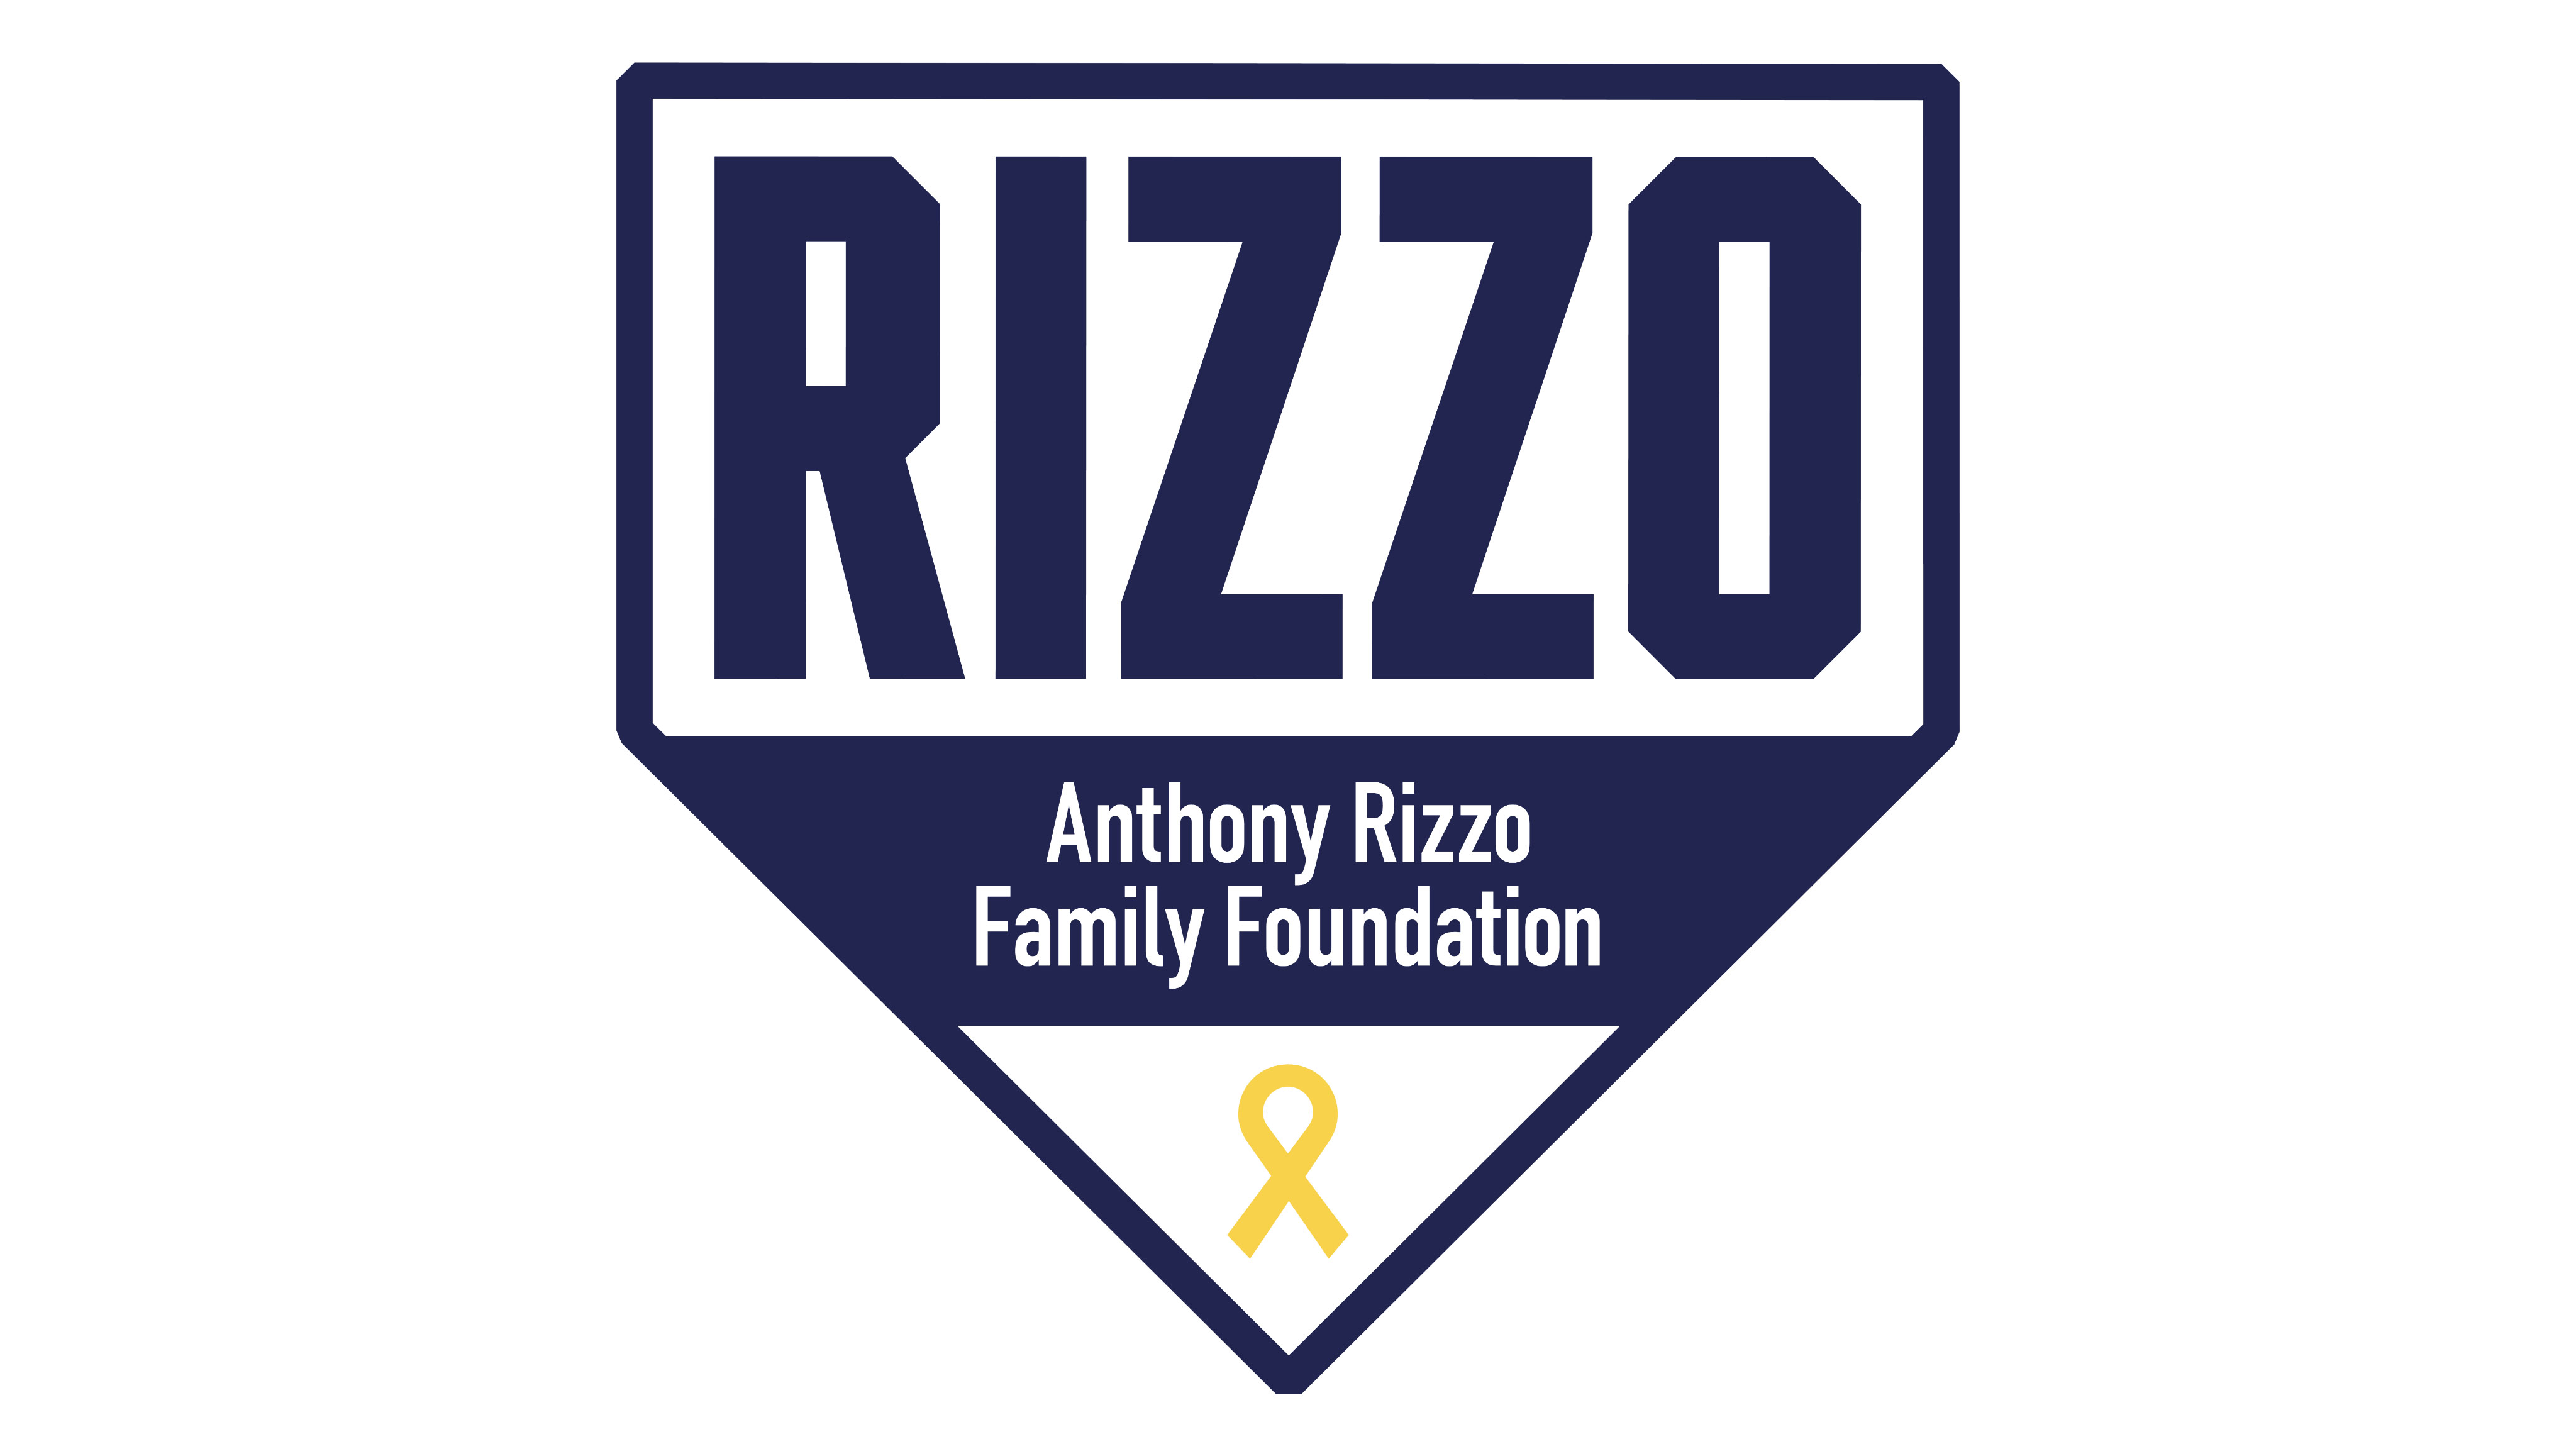 The Anthony Rizzo Family Foundation logo.